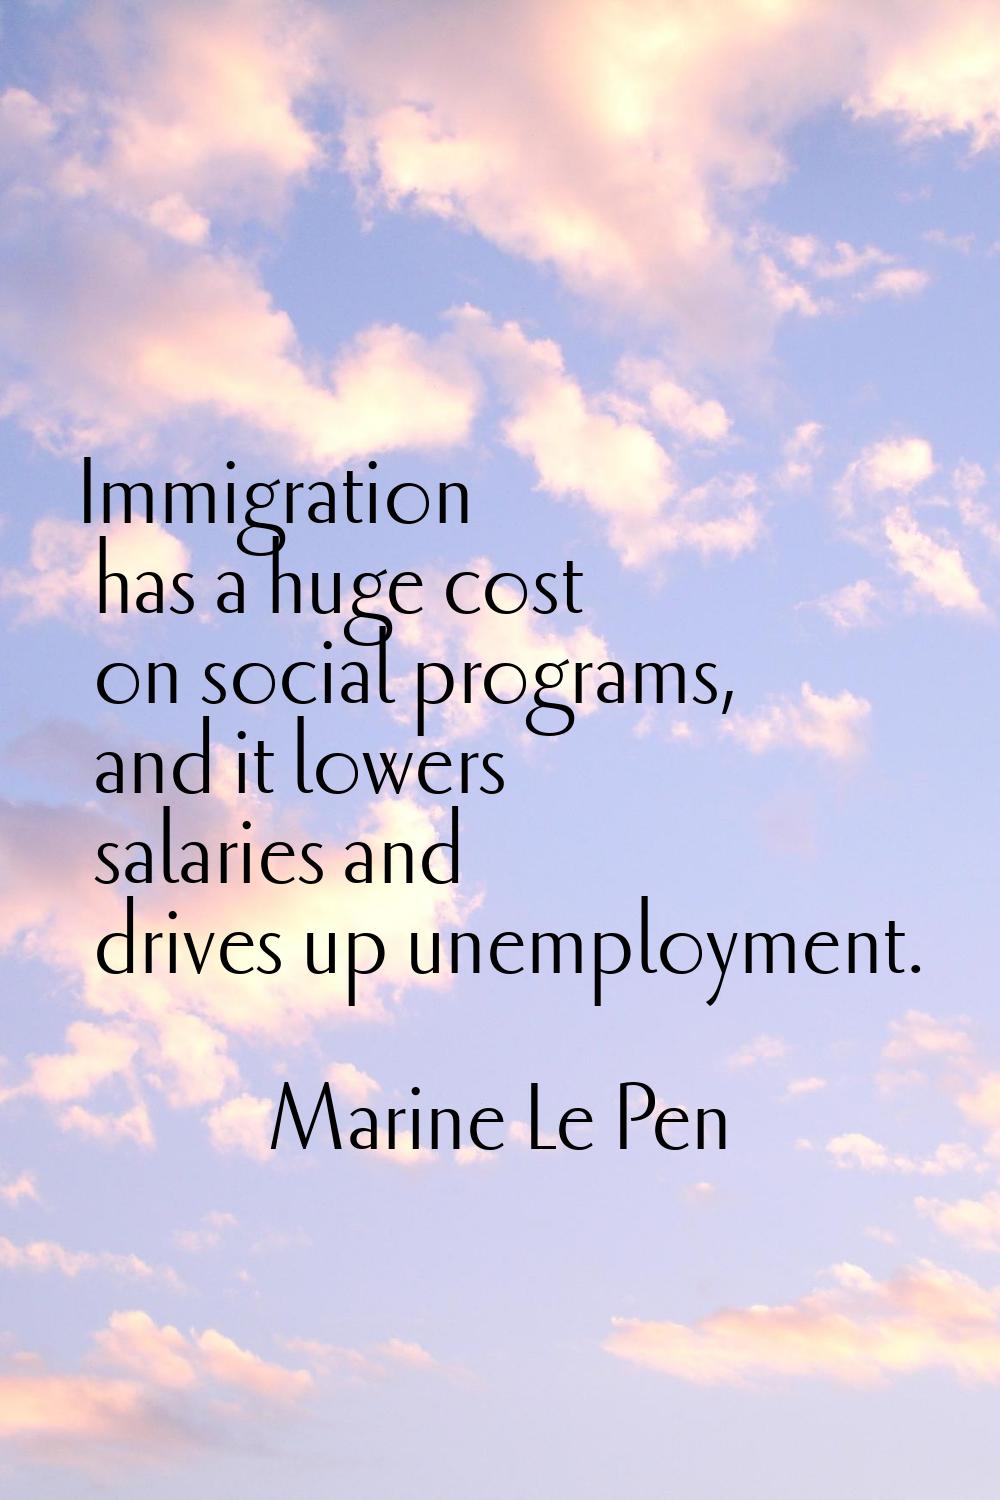 Immigration has a huge cost on social programs, and it lowers salaries and drives up unemployment.